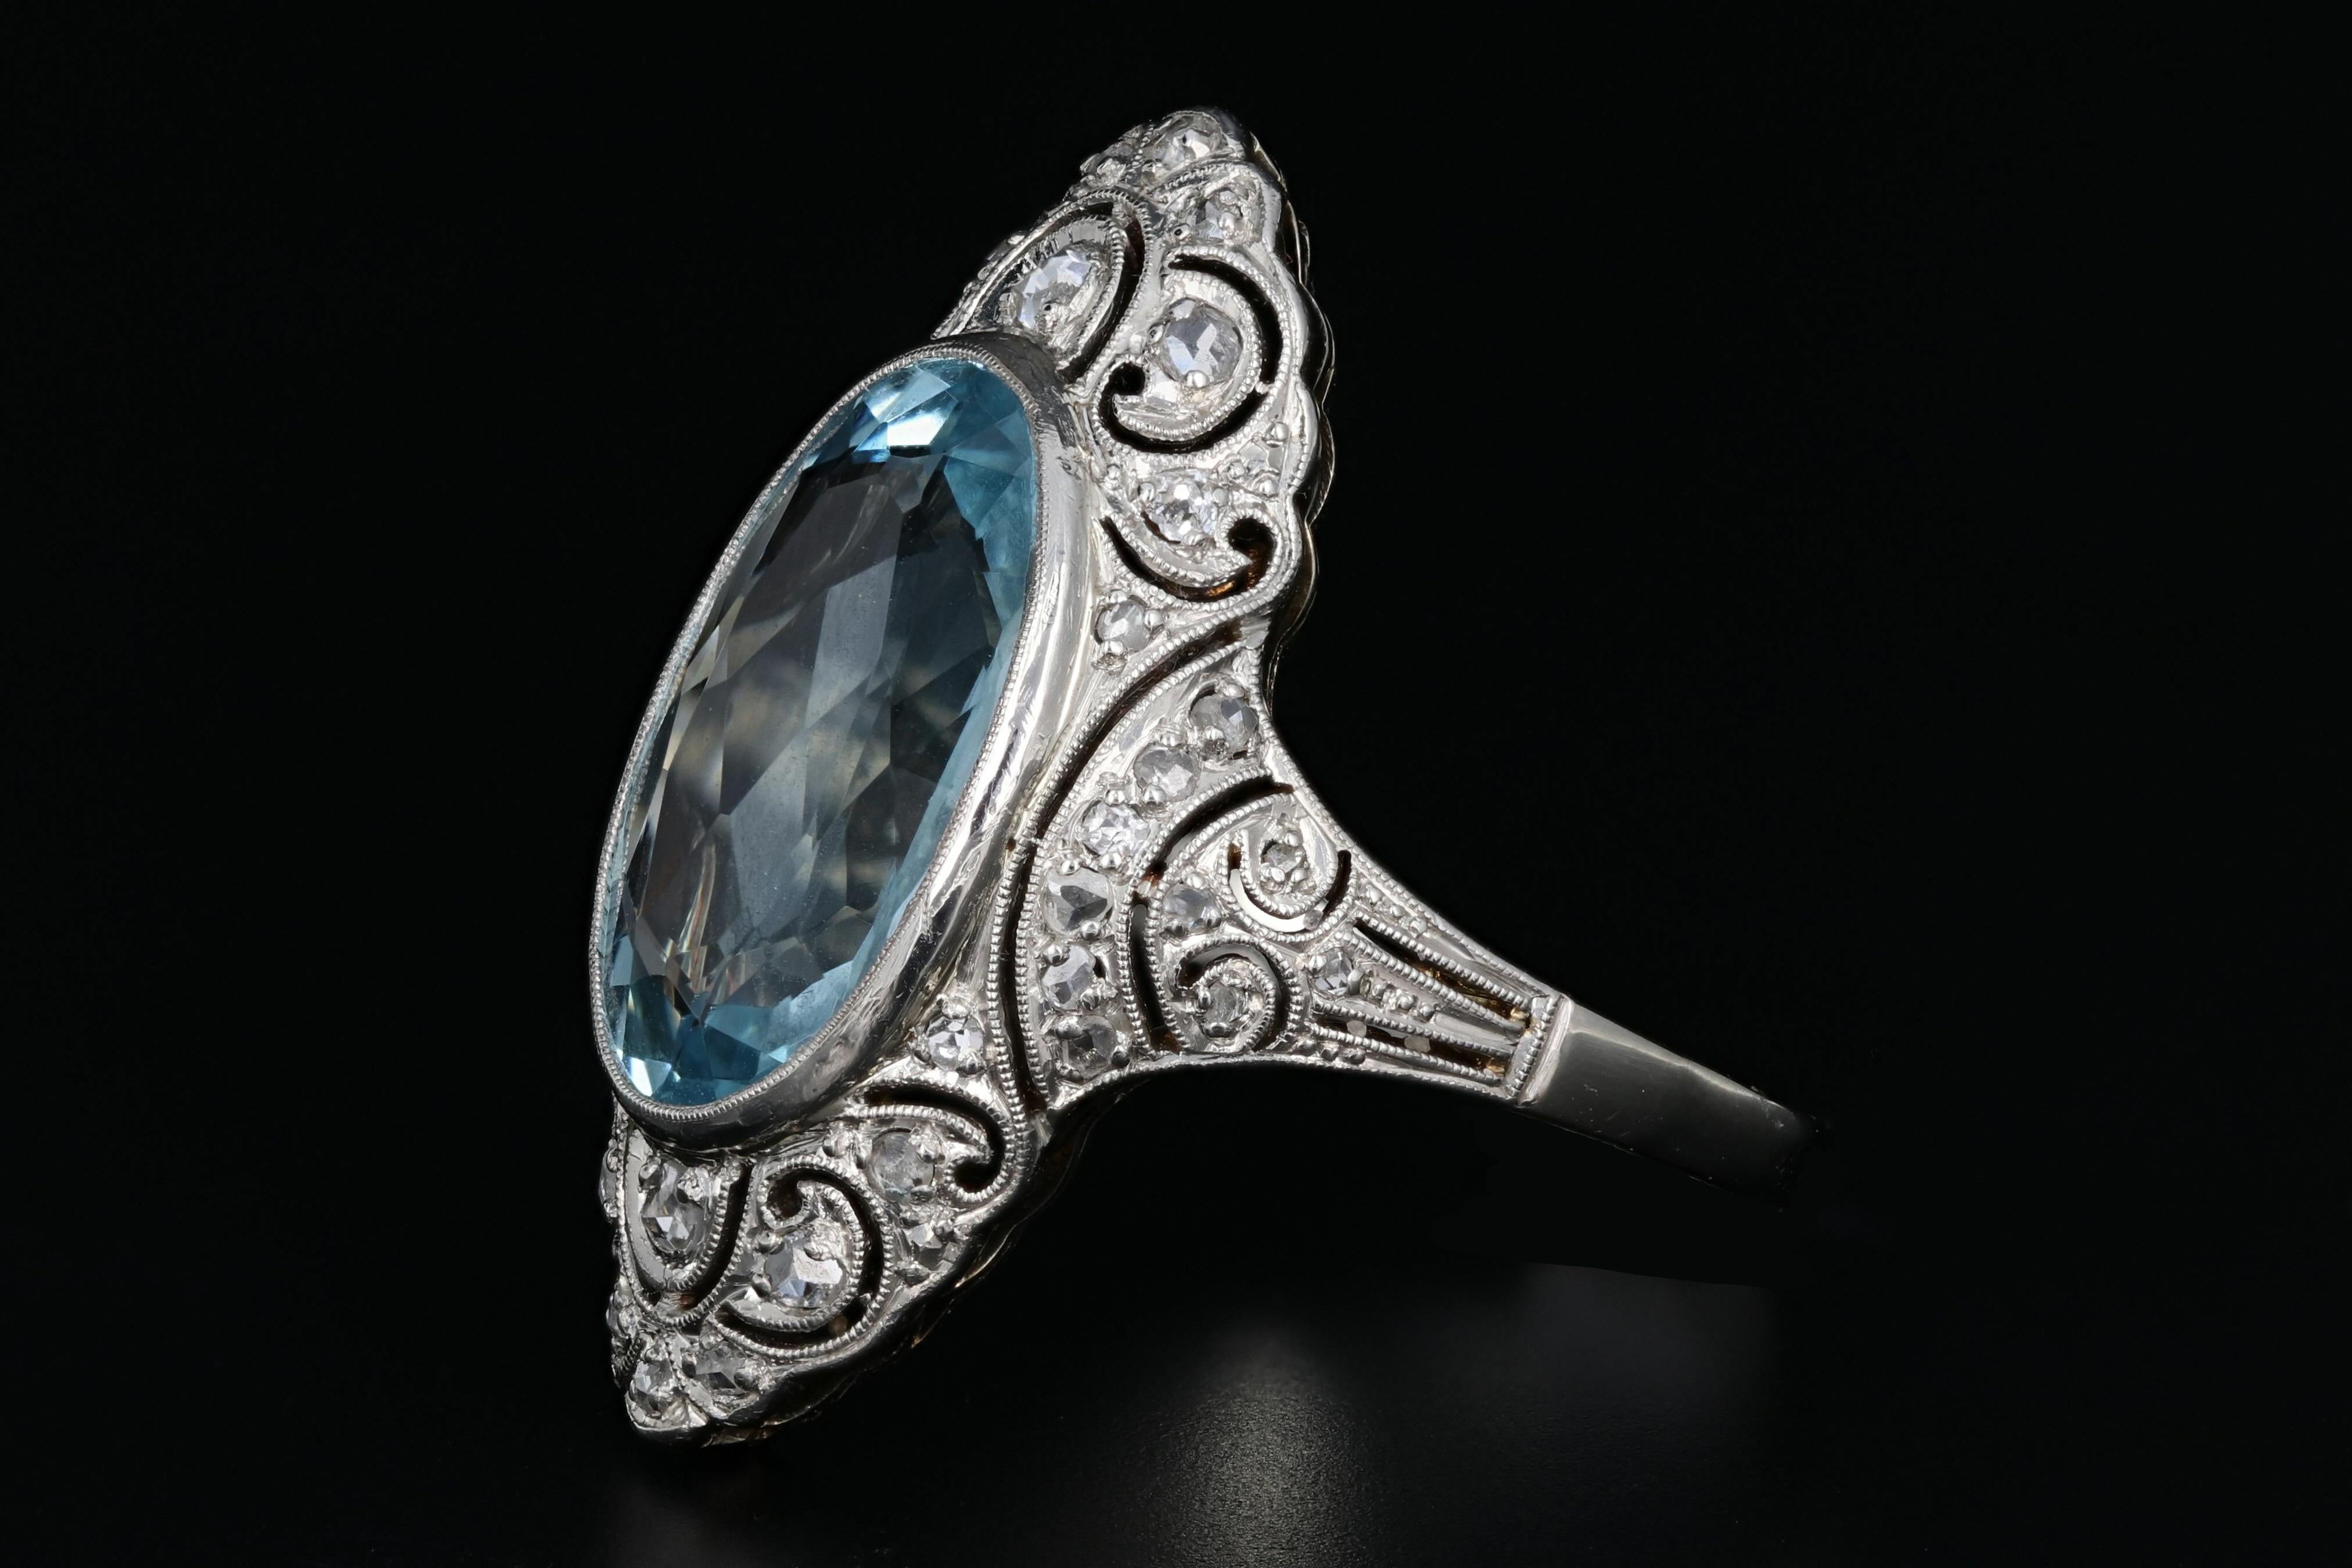 Era: Art Deco

Hallmarks: 585

Composition: Platinum and 14K Ring Shank

Primary Stone: Aquamarine

Stone Carat: Approximately 5.6 carats

Shape: Oval Cut

Accent Stone: Rose Cut Stones

Ring Width: 3cm

Rise Above Finger: 6.75mm

Ring Size: